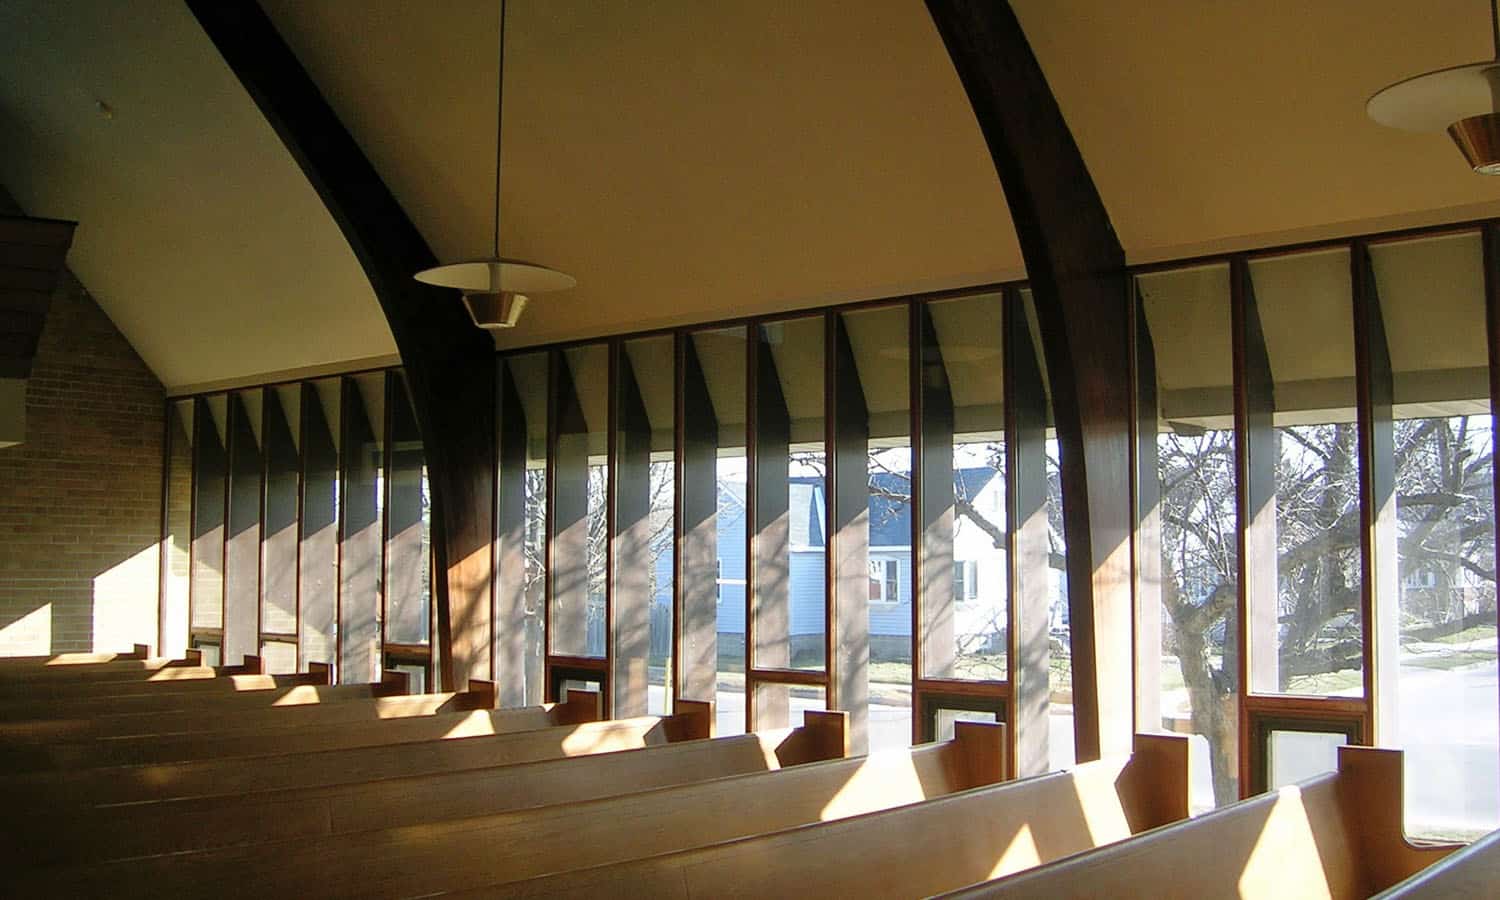 Windows along the edge of the sanctuary allowing filtered light to enter